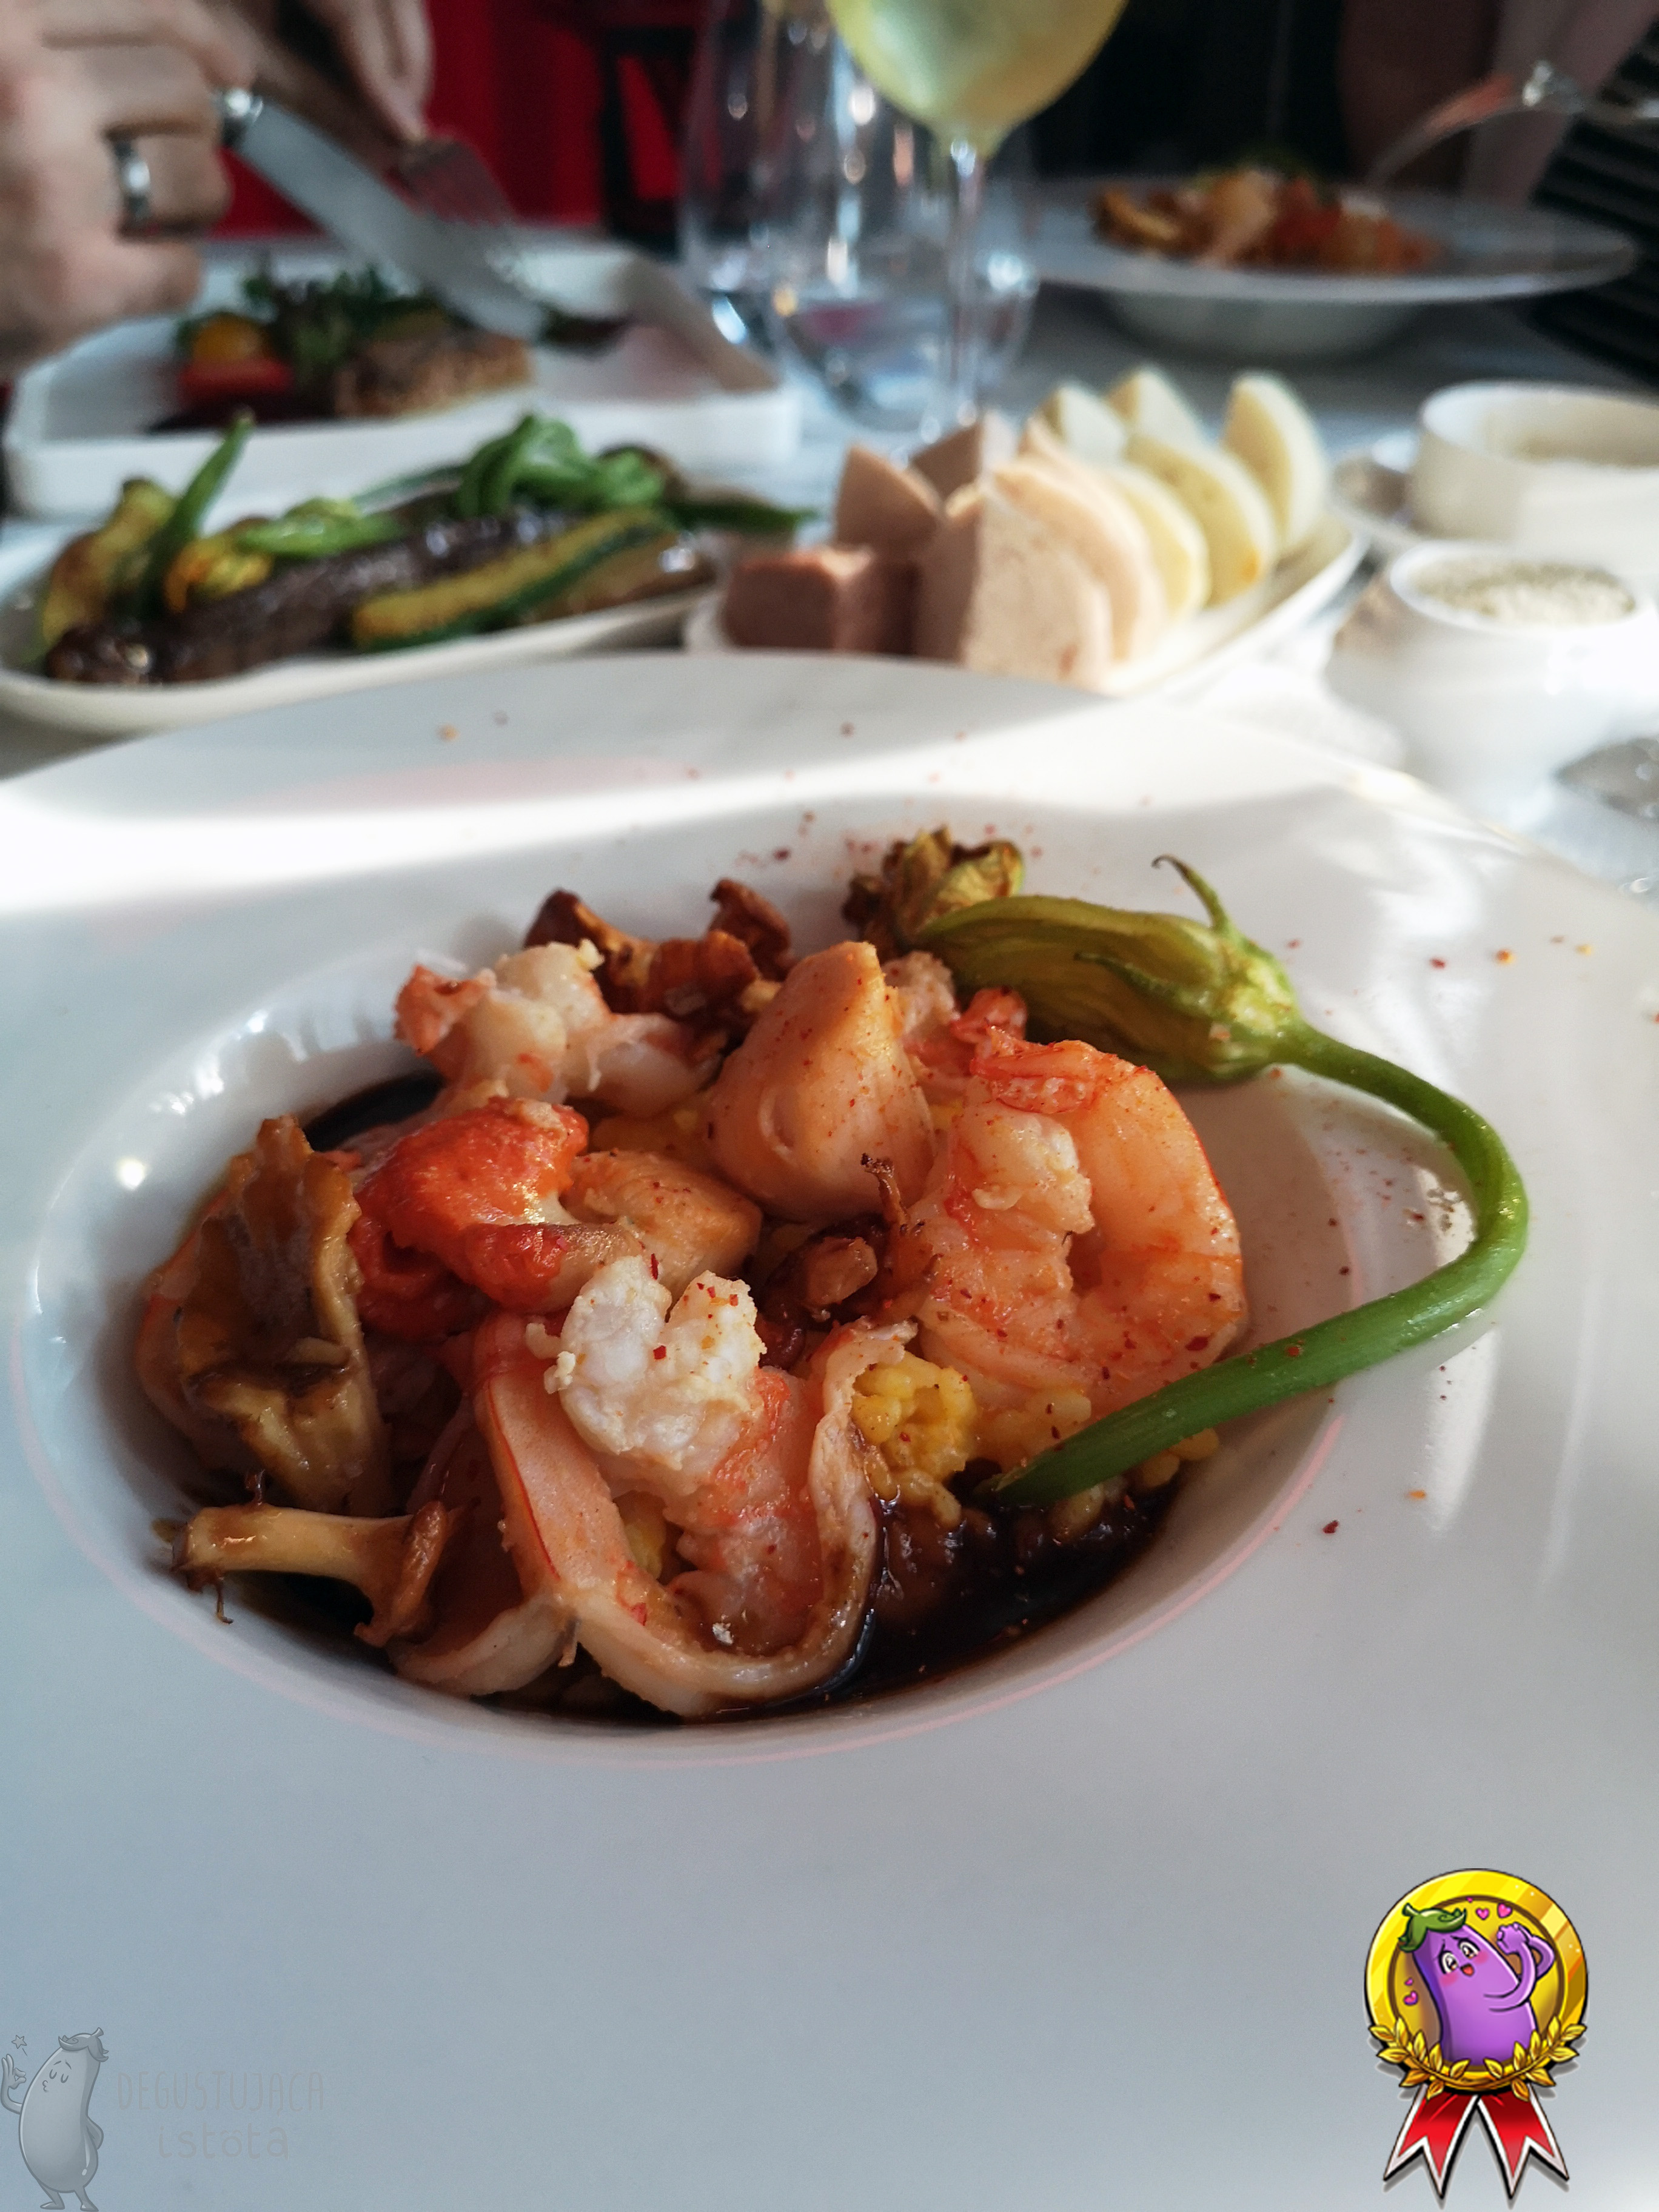 A white plate full of shrimp, scallops and chanterelles. A hint of yellow rice can be seen underneath. A steamed zucchini flower is placed on top of the seafood.